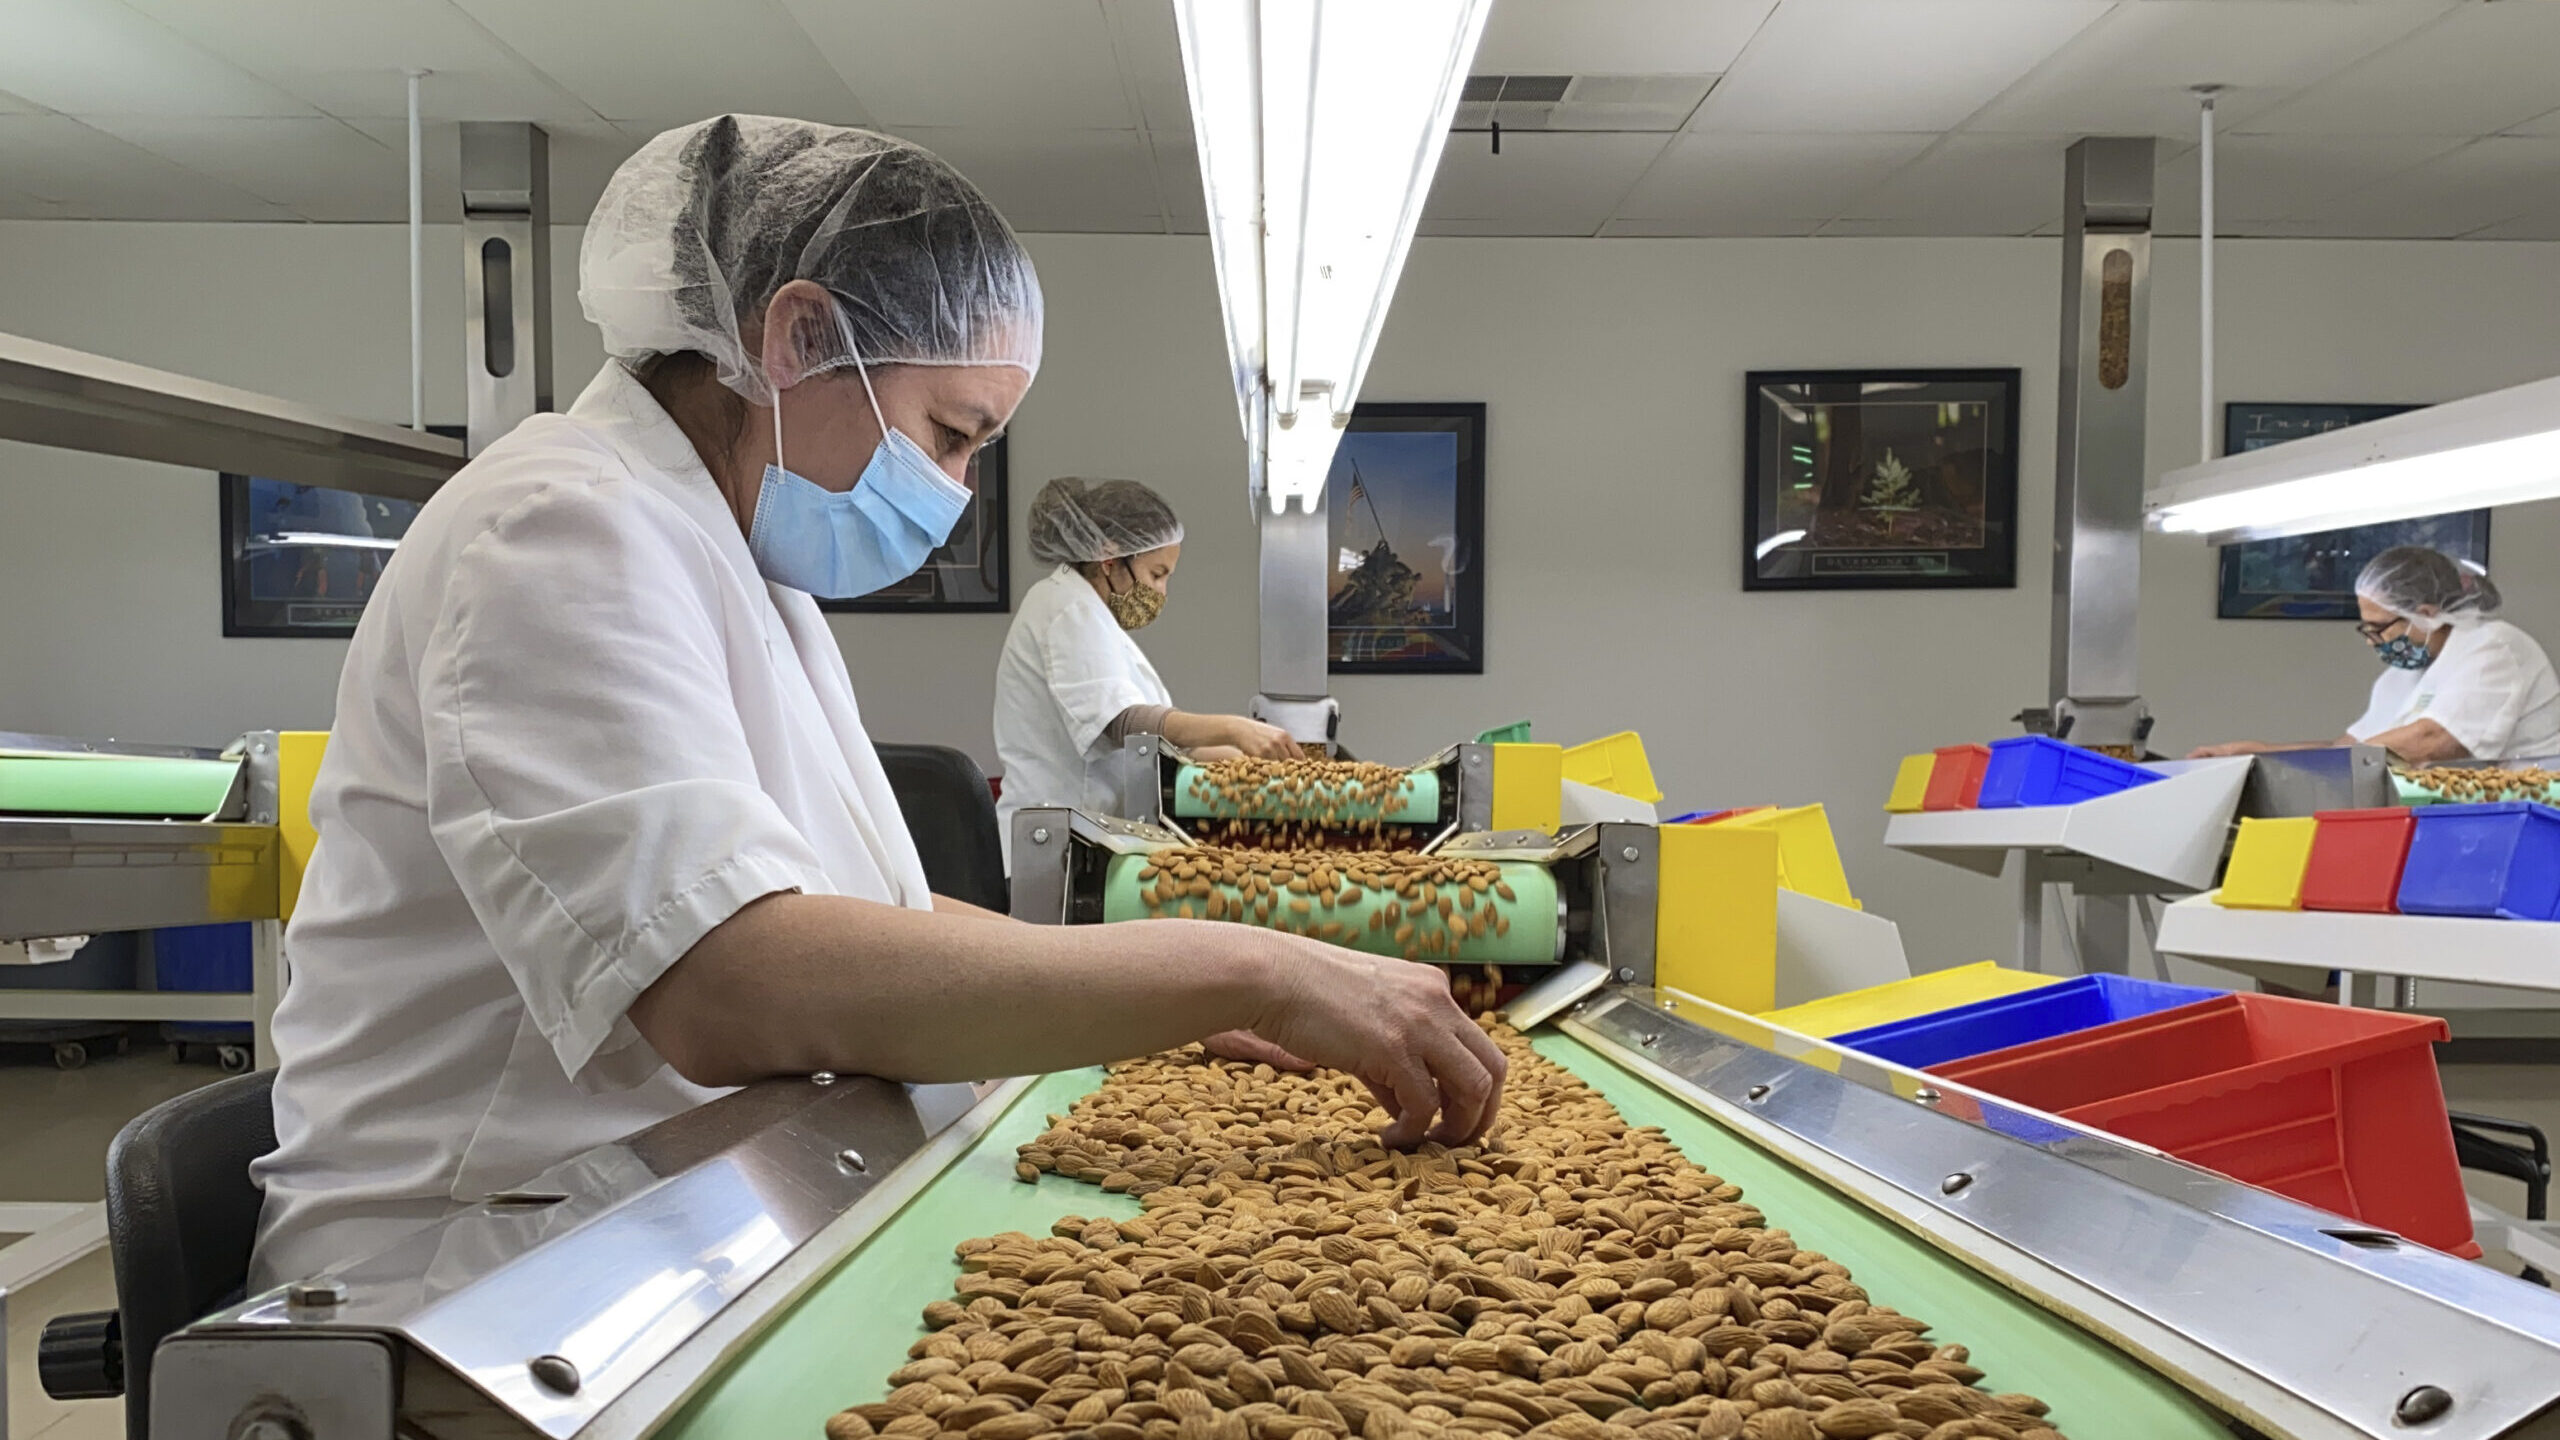 Employees inspect almonds in the processing facility at Steward & Jasper Orchards in Newman, Calif. on July 20, 2021. California's deepening drought threatens its $6 billion almond industry, which produces about 80 percent of the world's almonds. As water becomes scarce and expensive, some growers have stopped irrigating their orchards and plan to tear them out years earlier than planned. (AP Photo/Terry Chea)